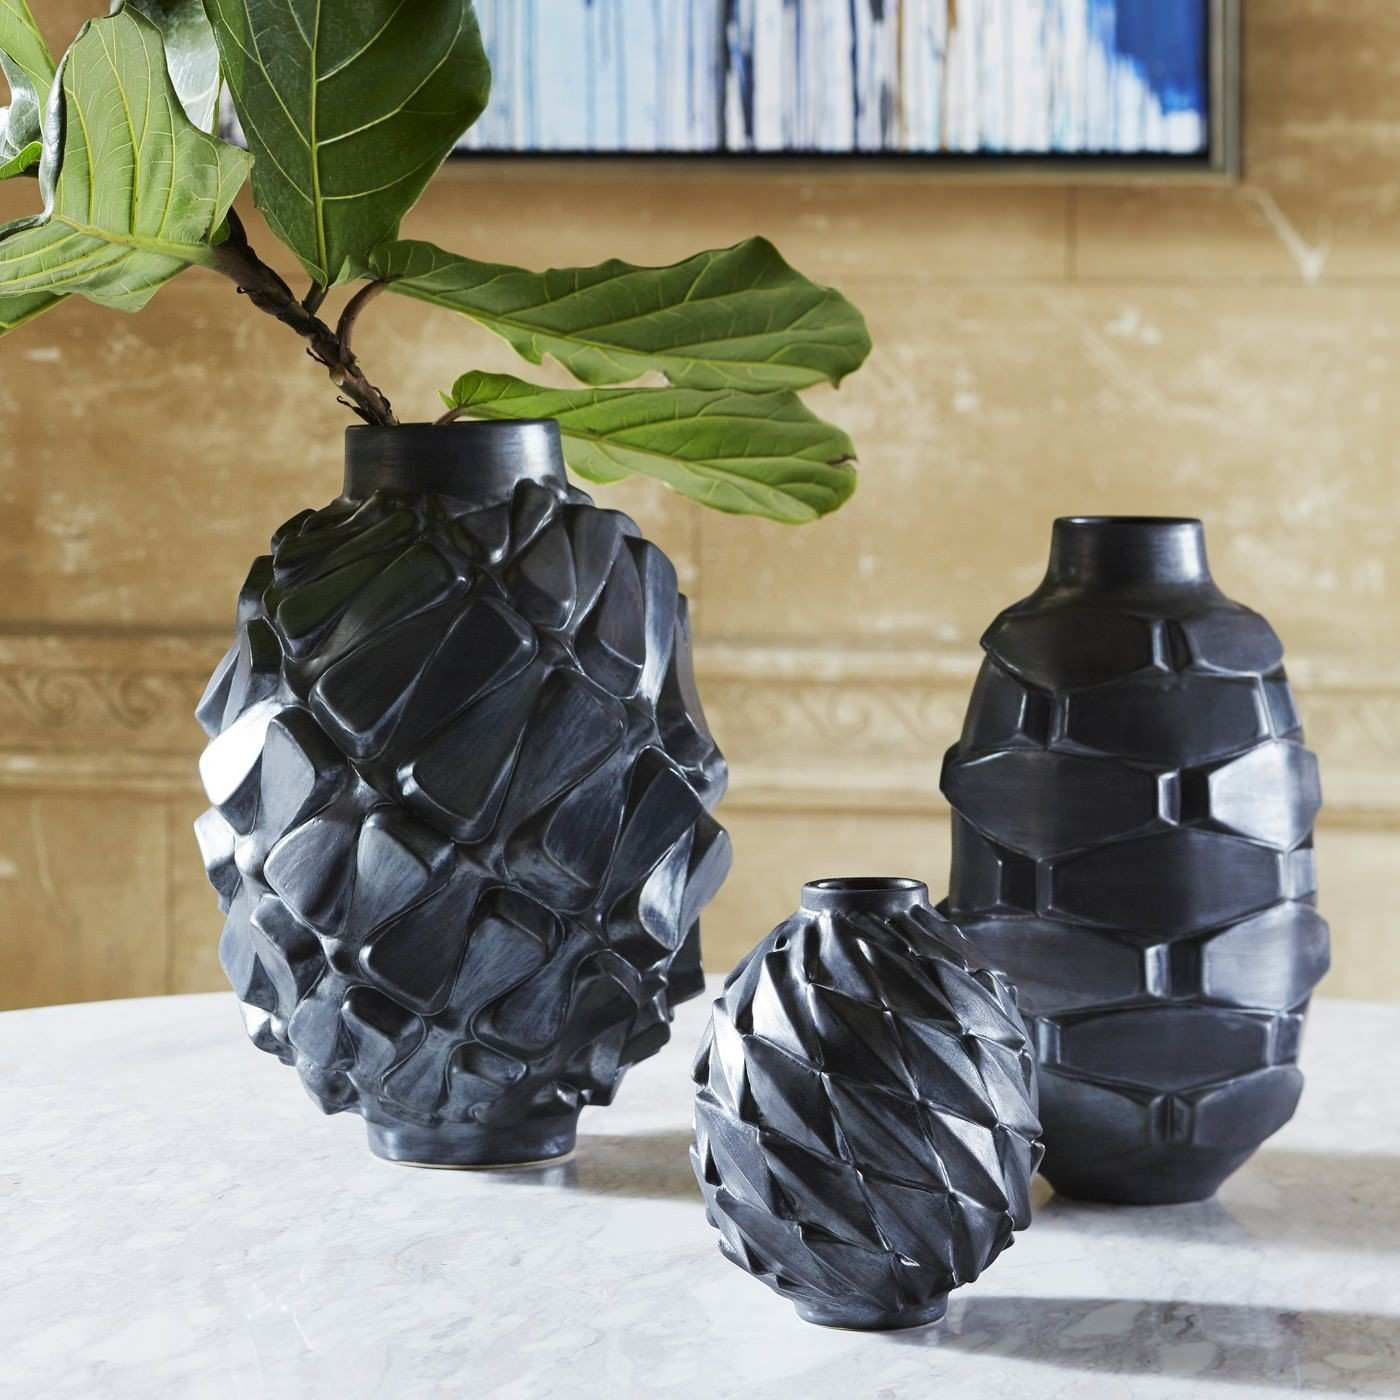 16 Unique Small Green Vase 2024 free download small green vase of decorating ideas for vases awesome jonathan adler grenade bricks within decorating ideas for vases awesome jonathan adler grenade bricks vase of decorating ideas for vase